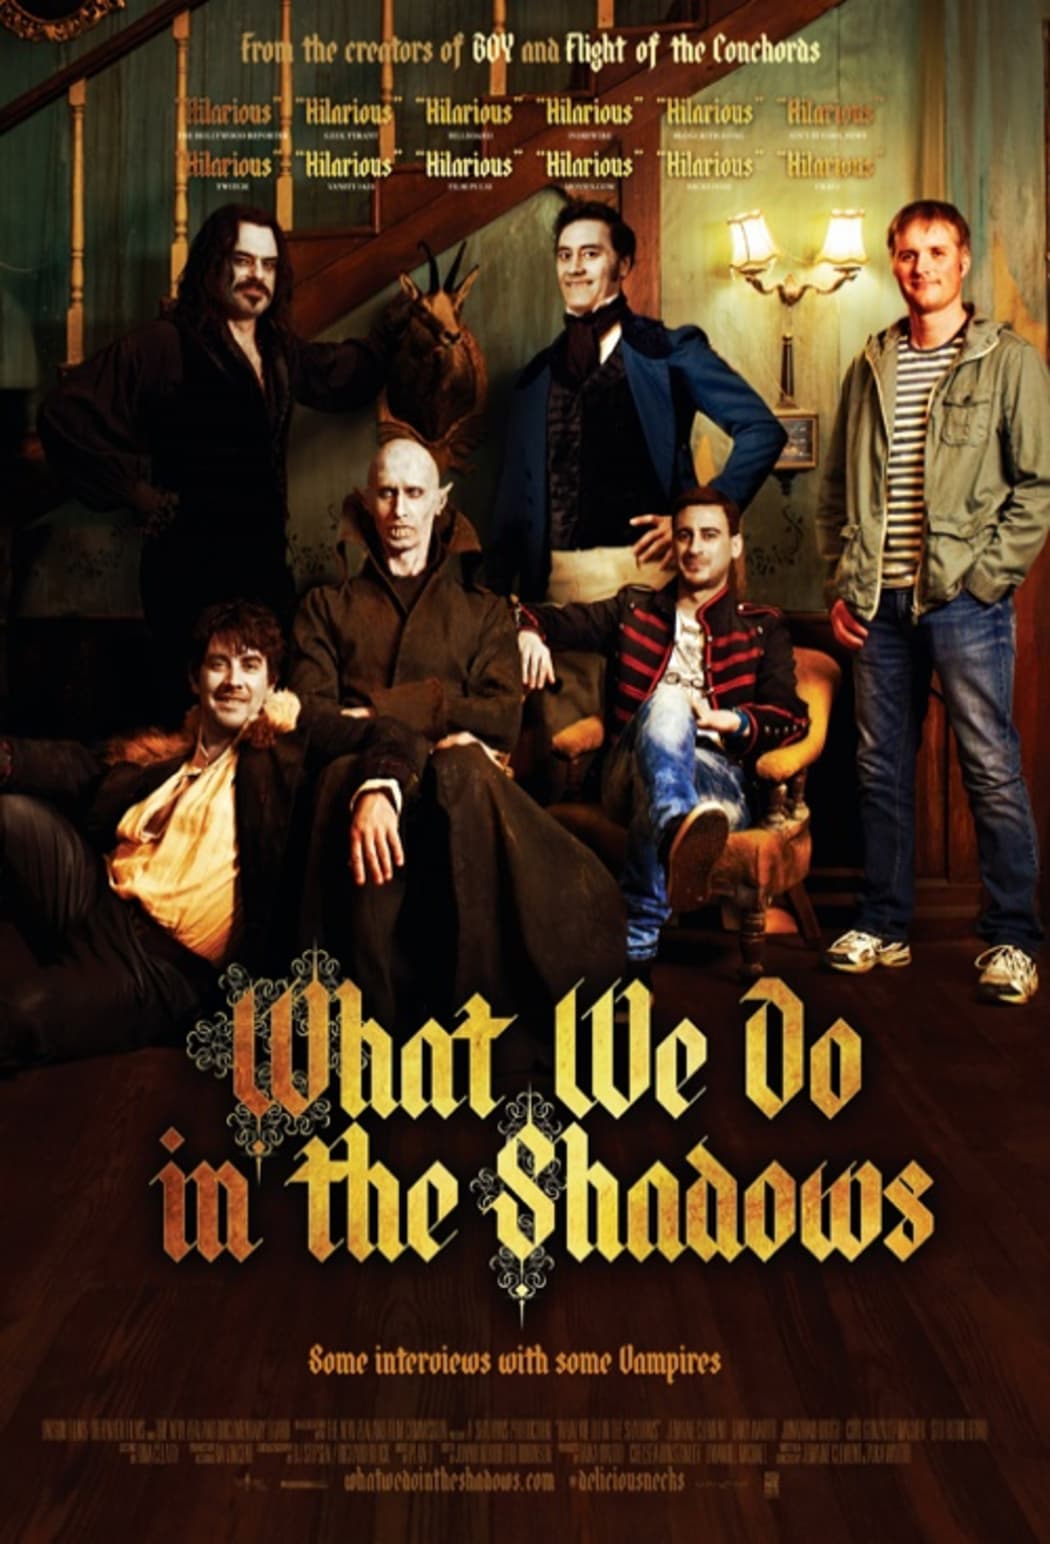 Making What We do in the Shadows is one of the best jobs Cori Gonzalez-Macuer can remember